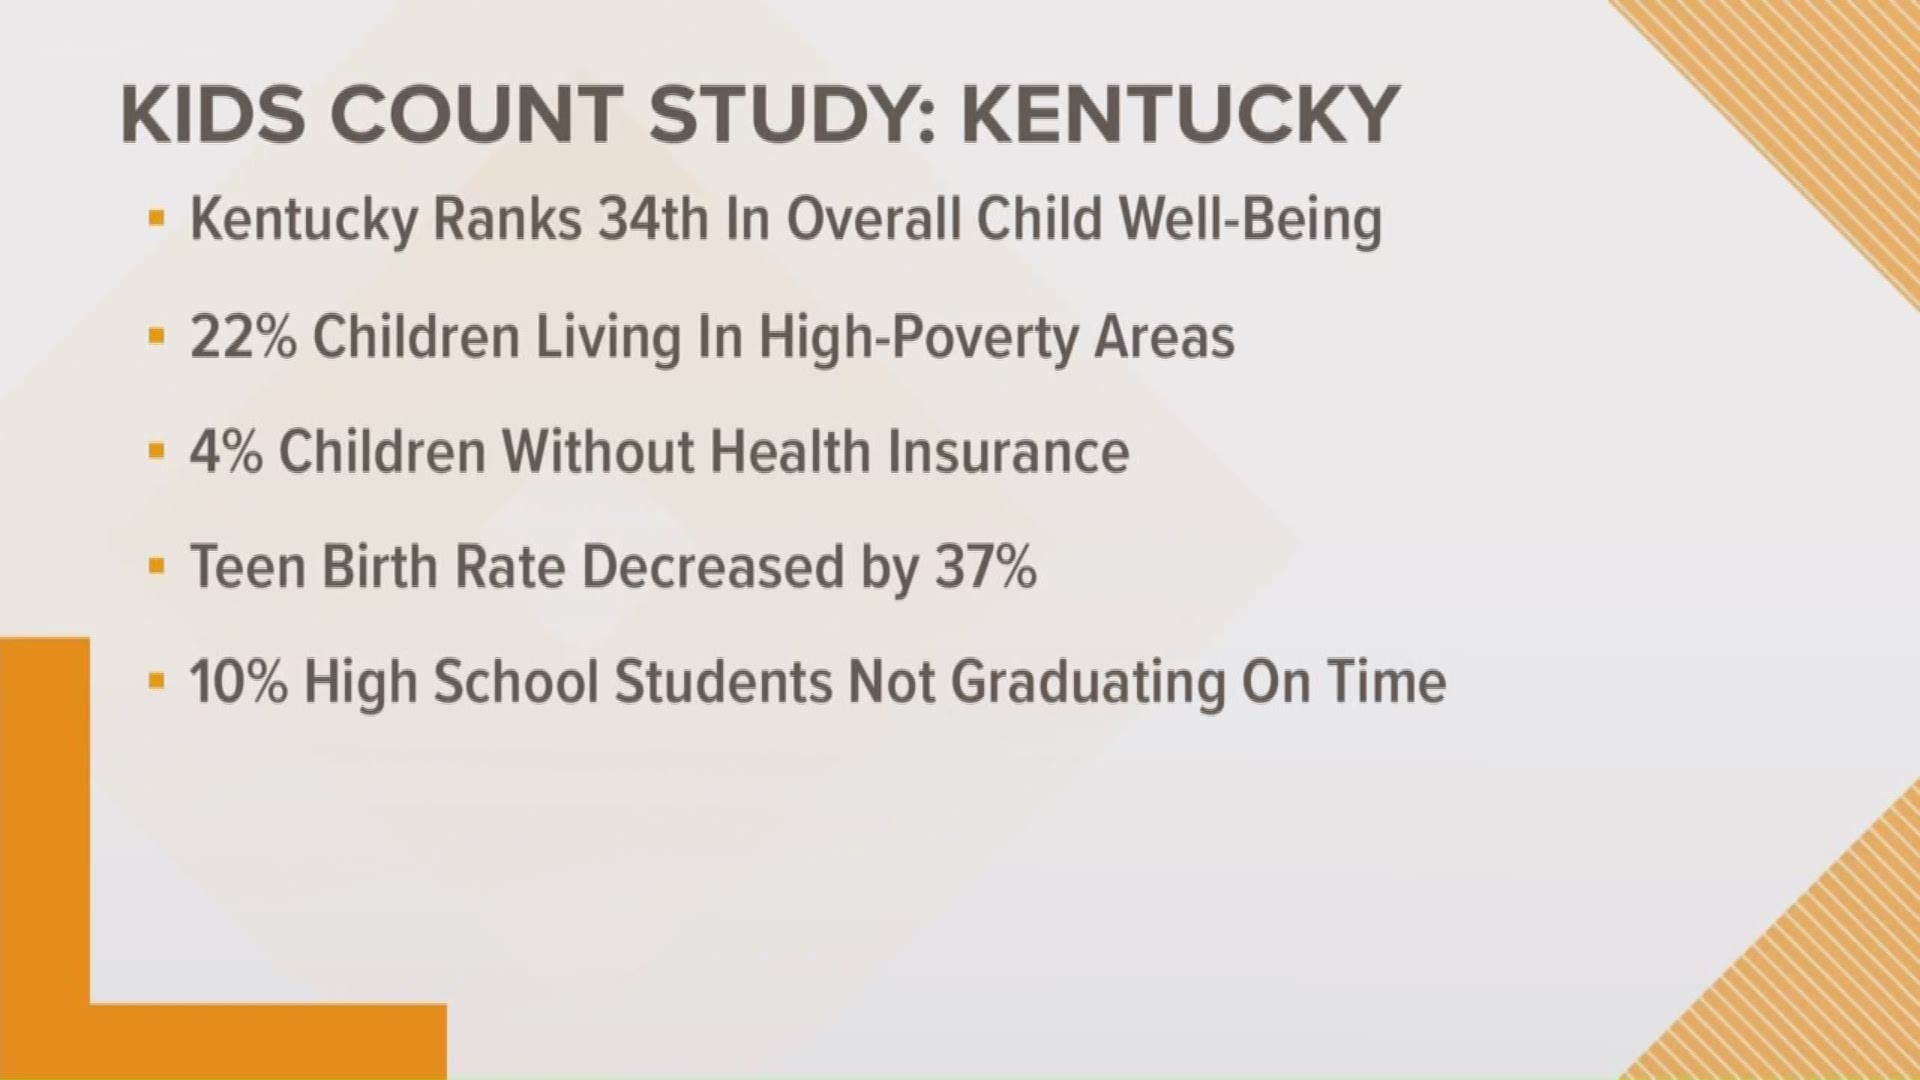 While Indiana scored higher than Kentucky in most categories in the Kids Count study, about 16% of high school students are not graduating on time.